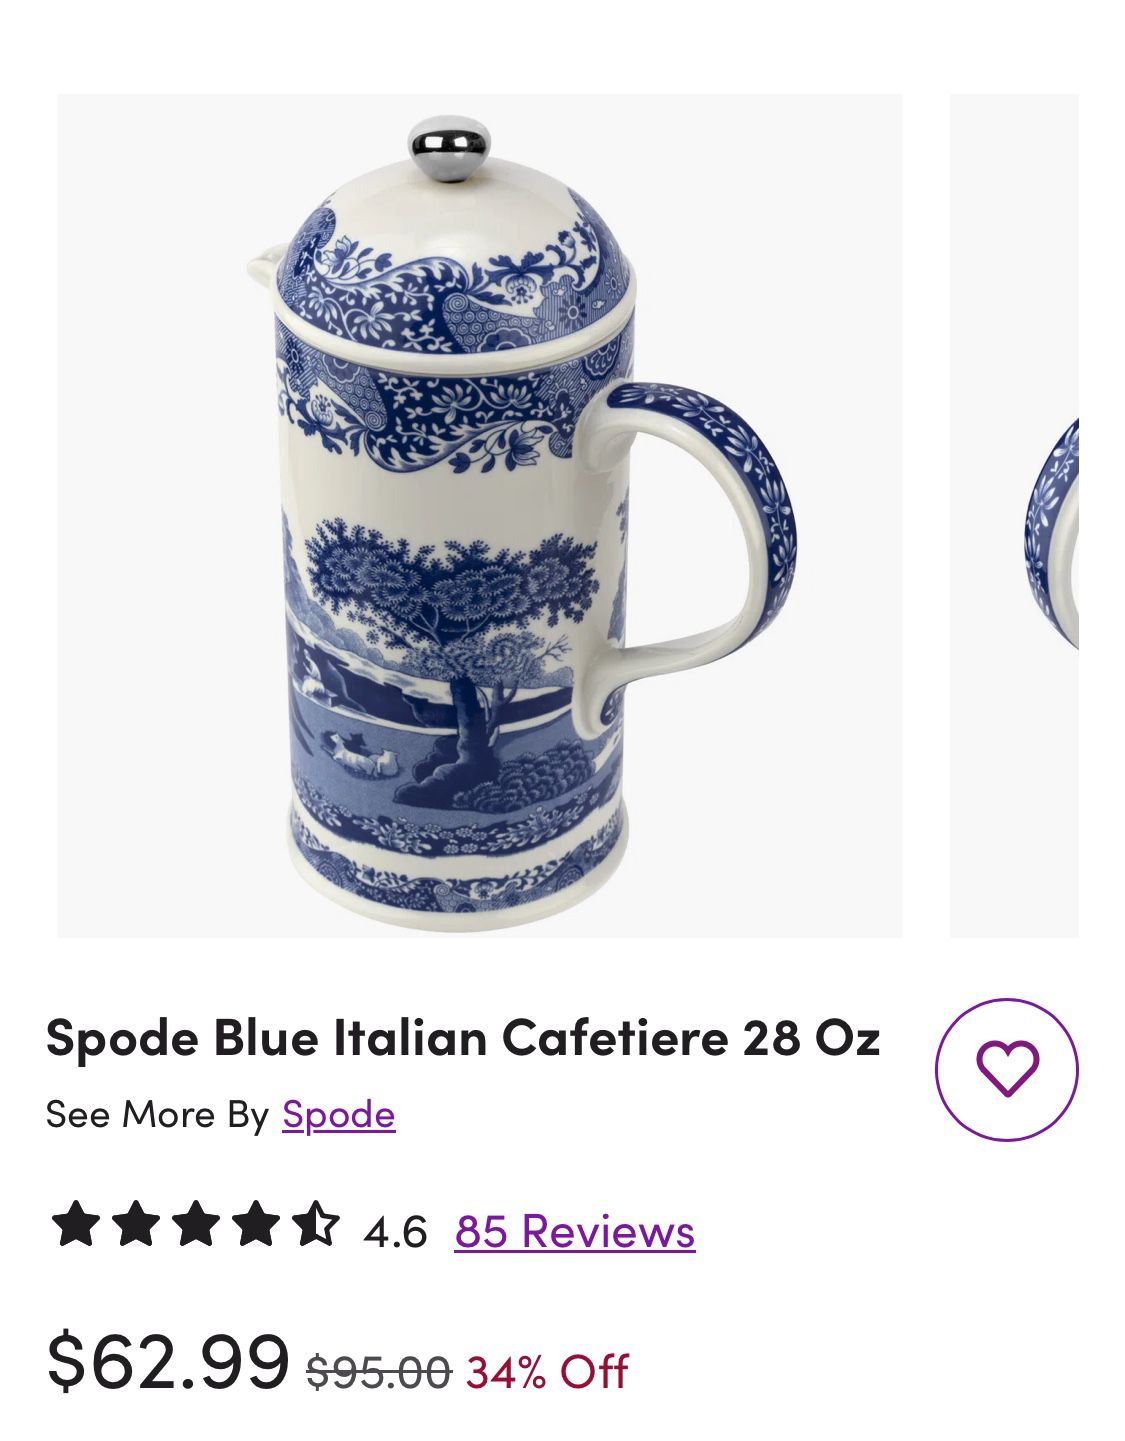 Spode Blue Italian 28 Oz Cafetiere (French Press)